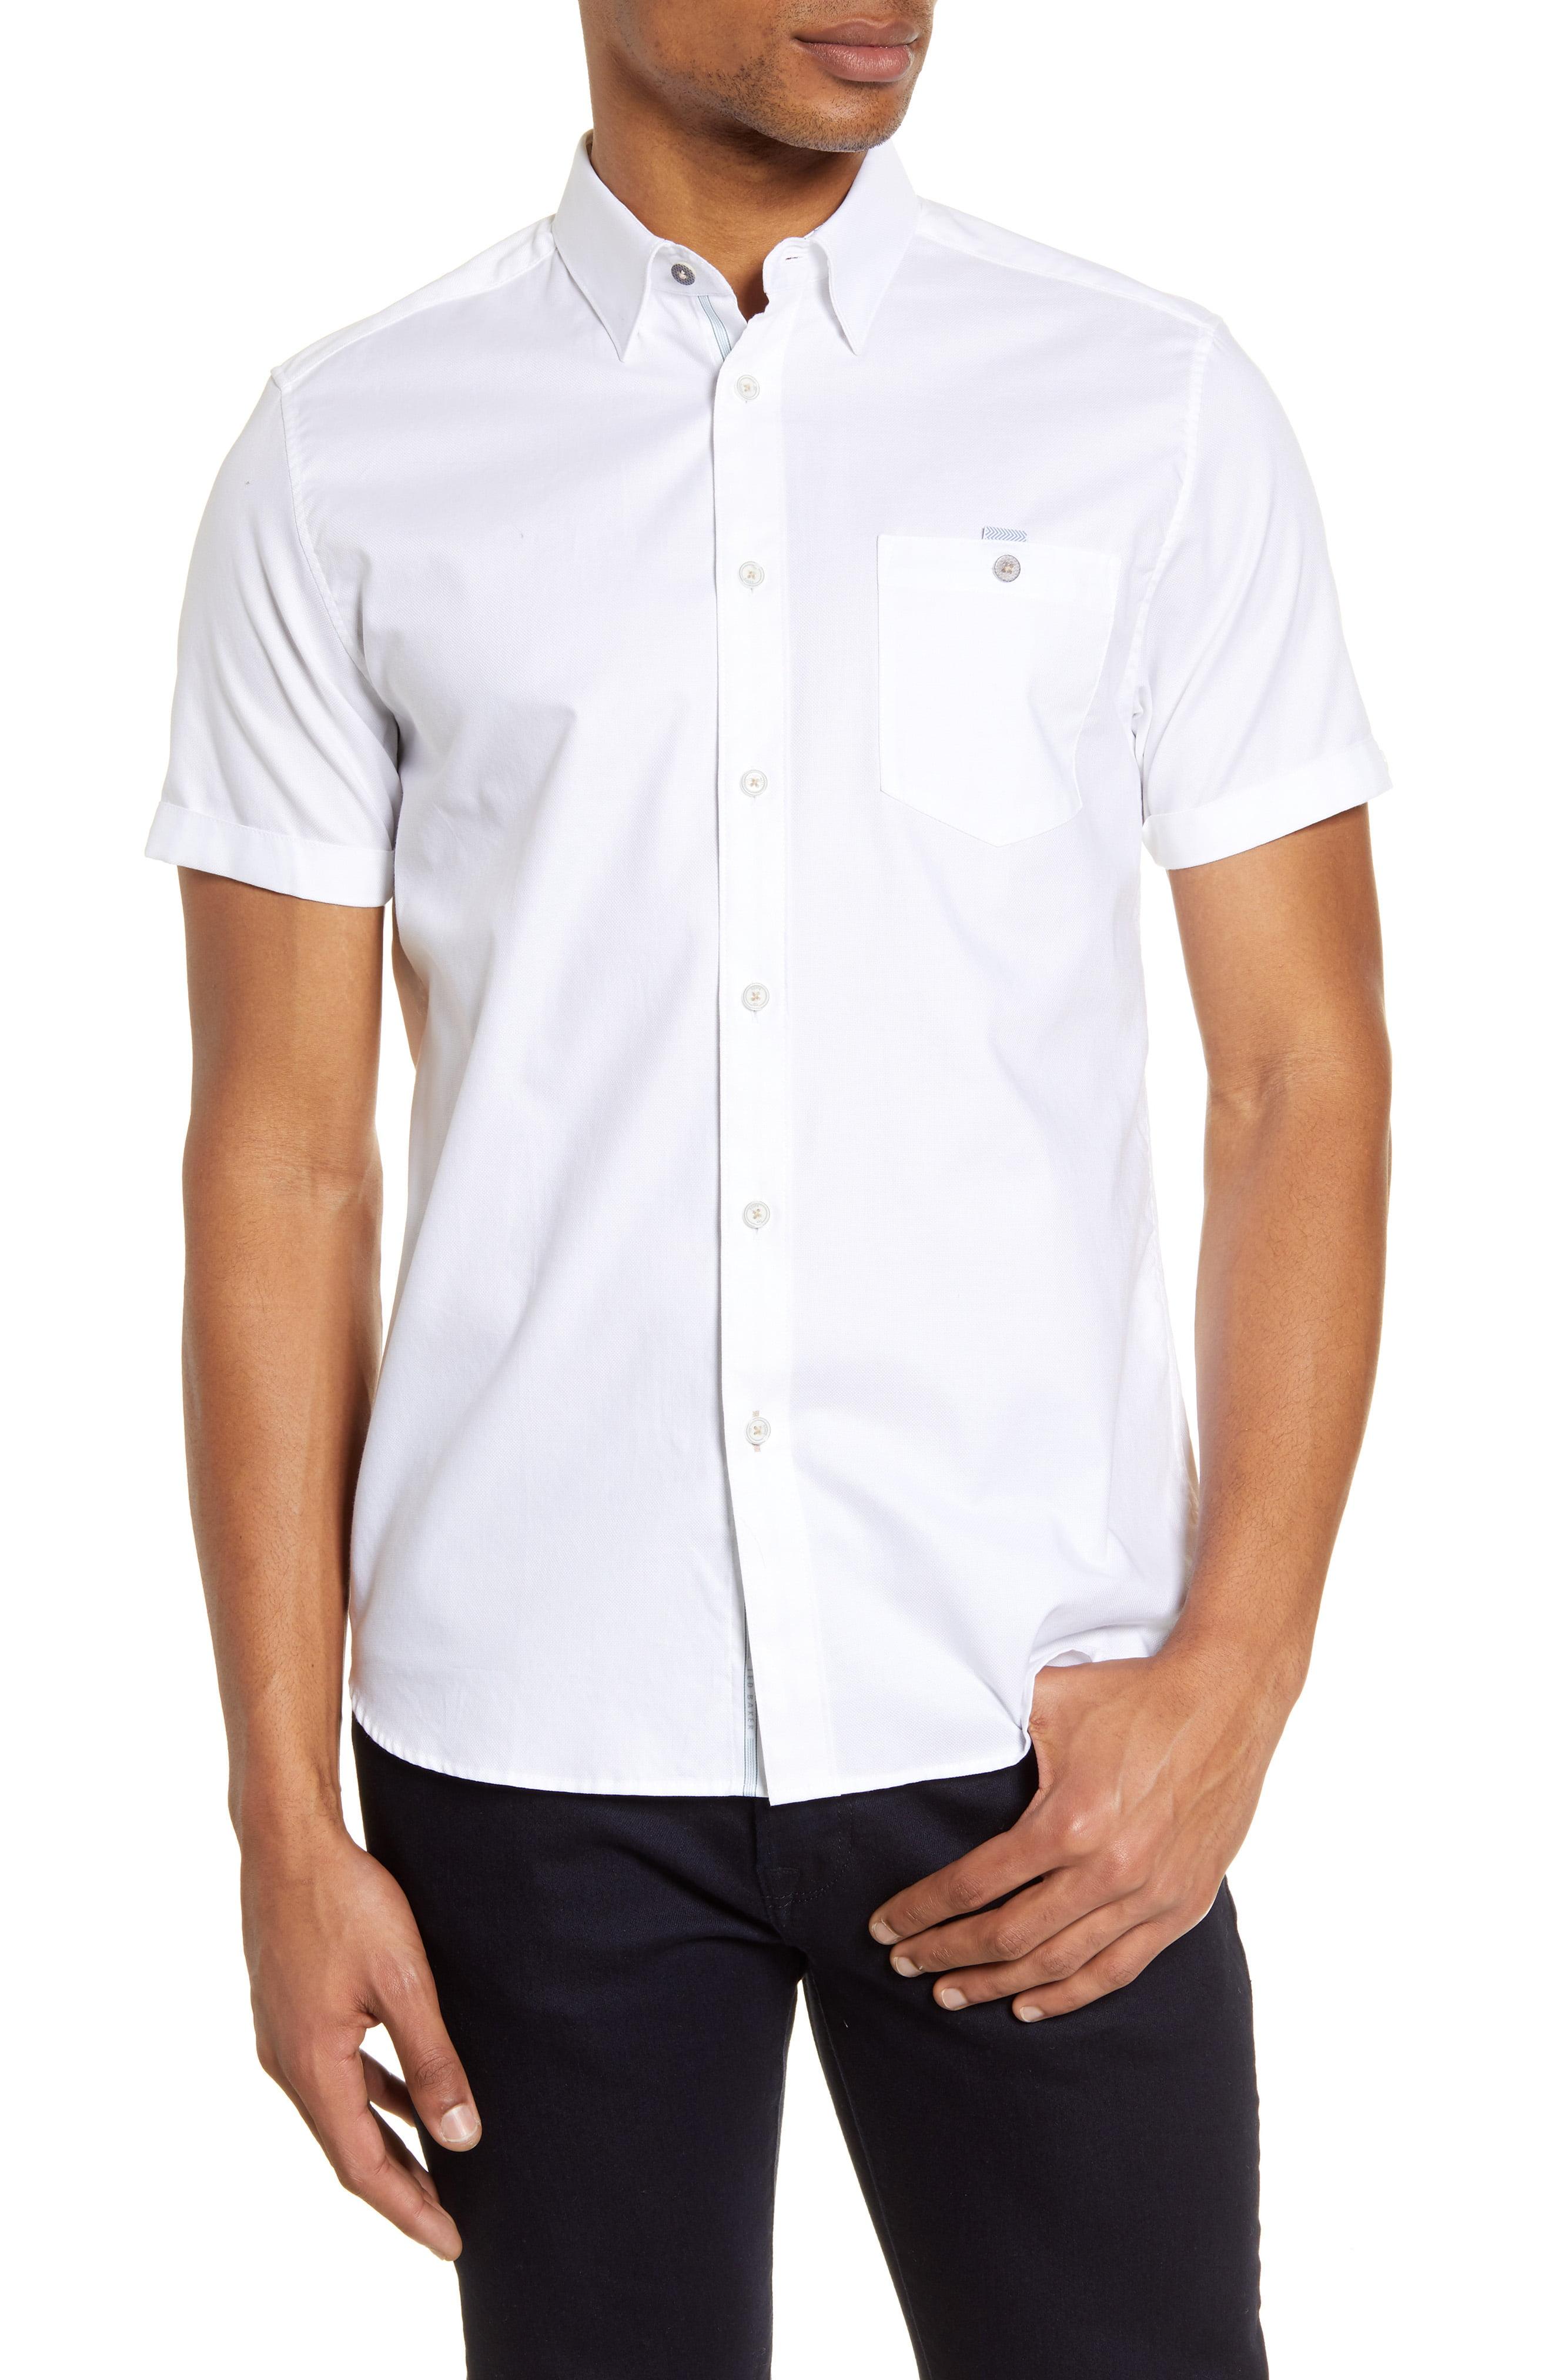 Ted Baker Cotton Yesso Short Sleeve Button-up Shirt in White for Men - Lyst